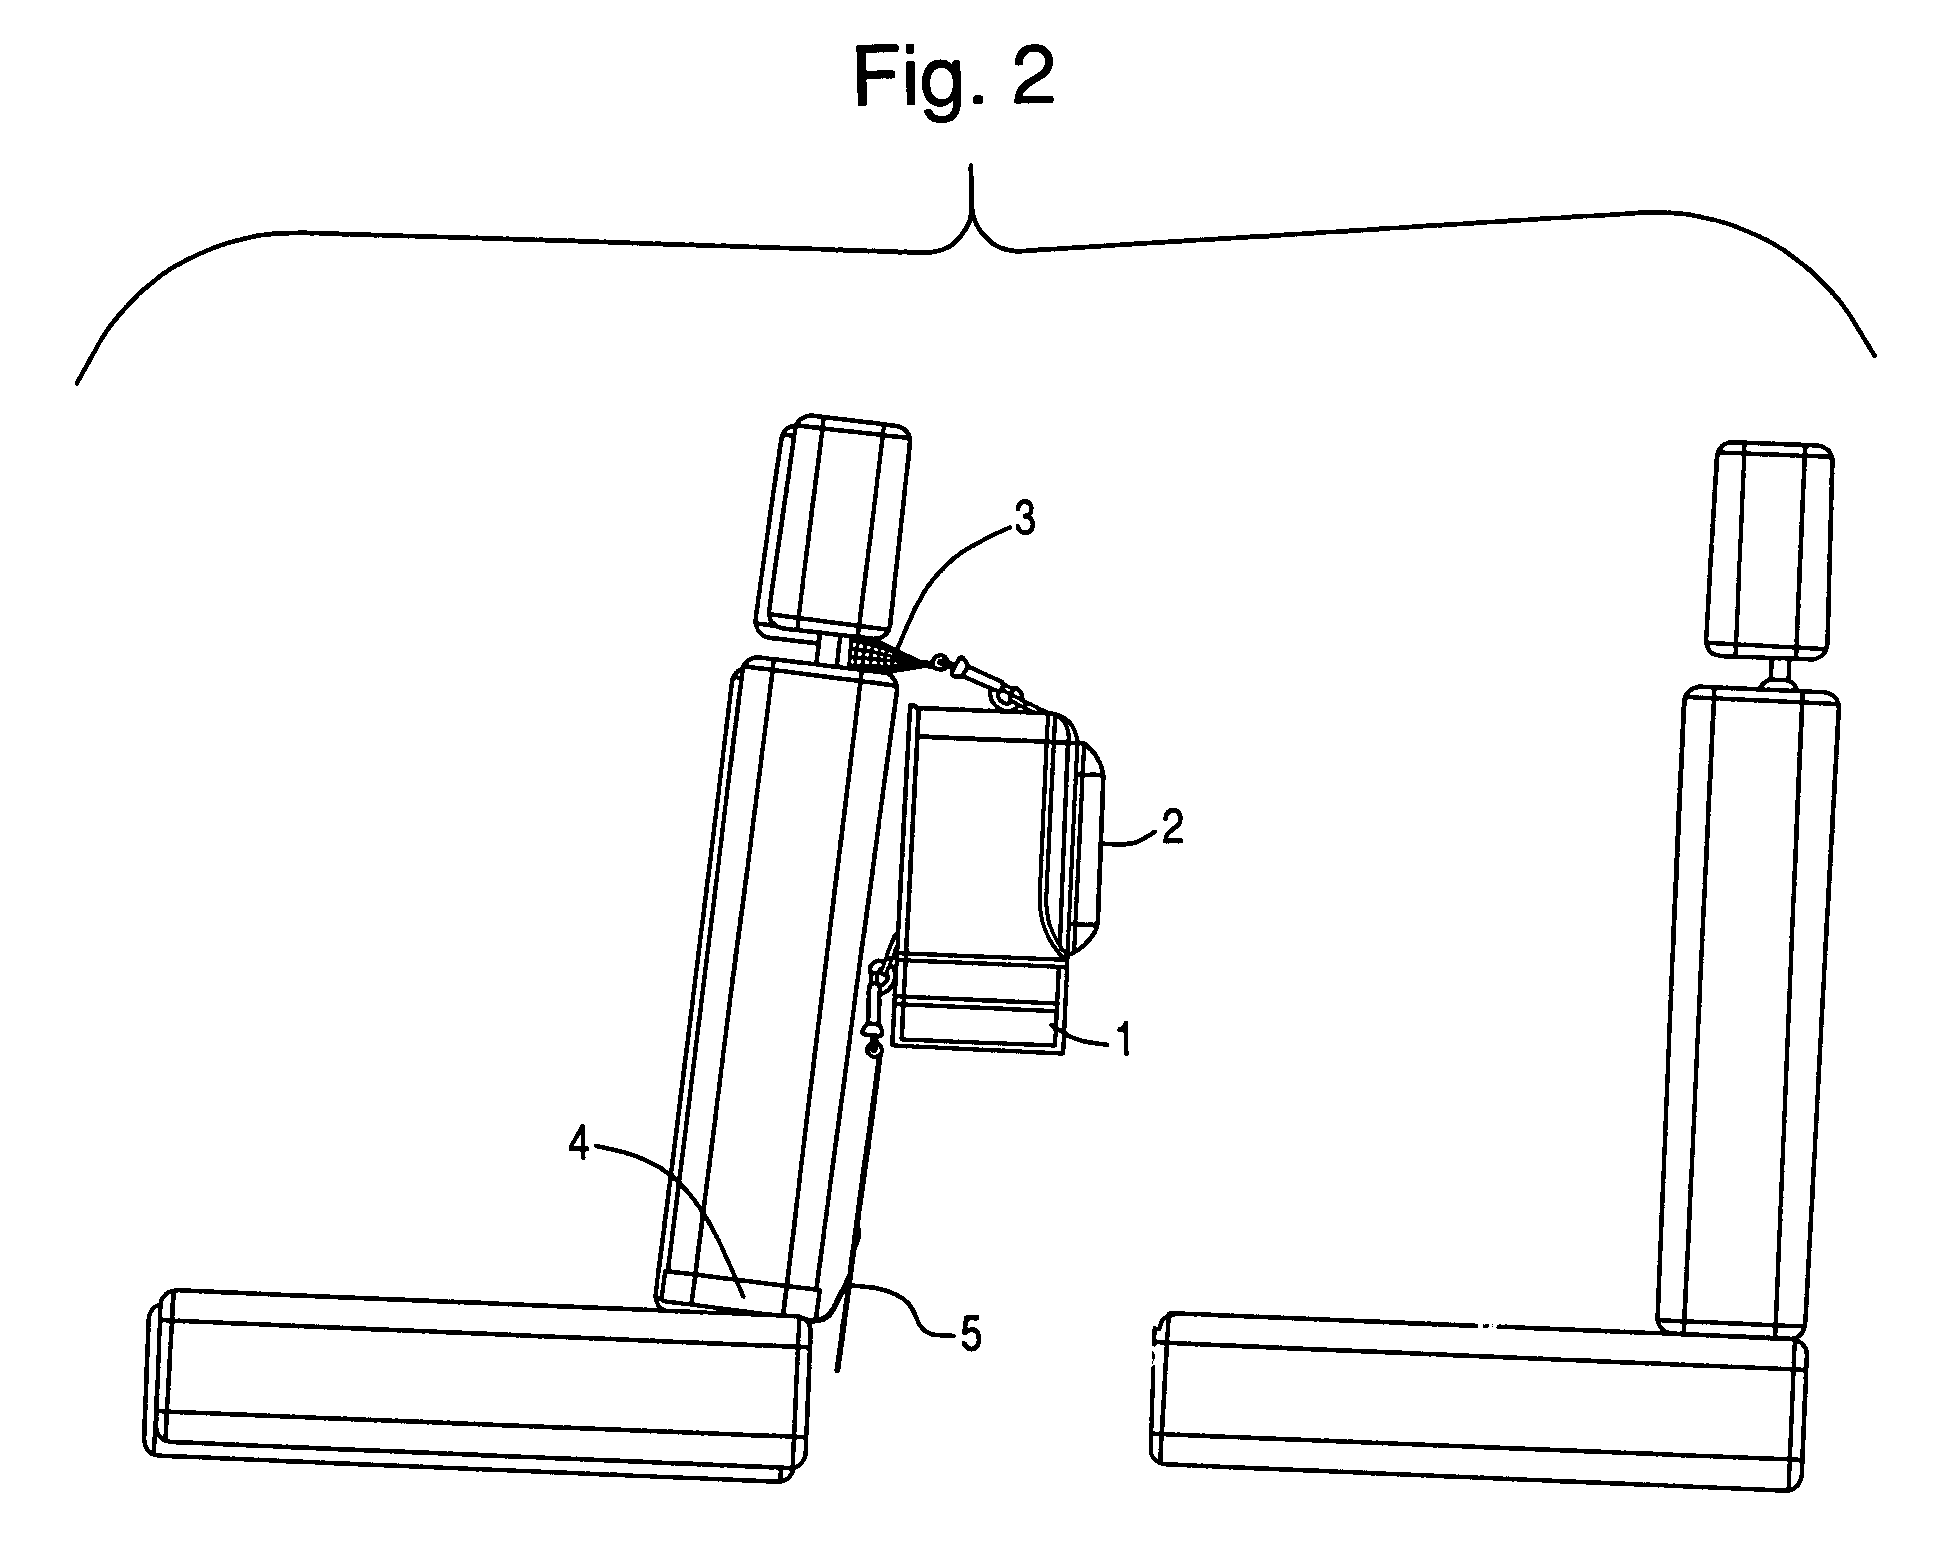 Mounting system for audio visual equipment